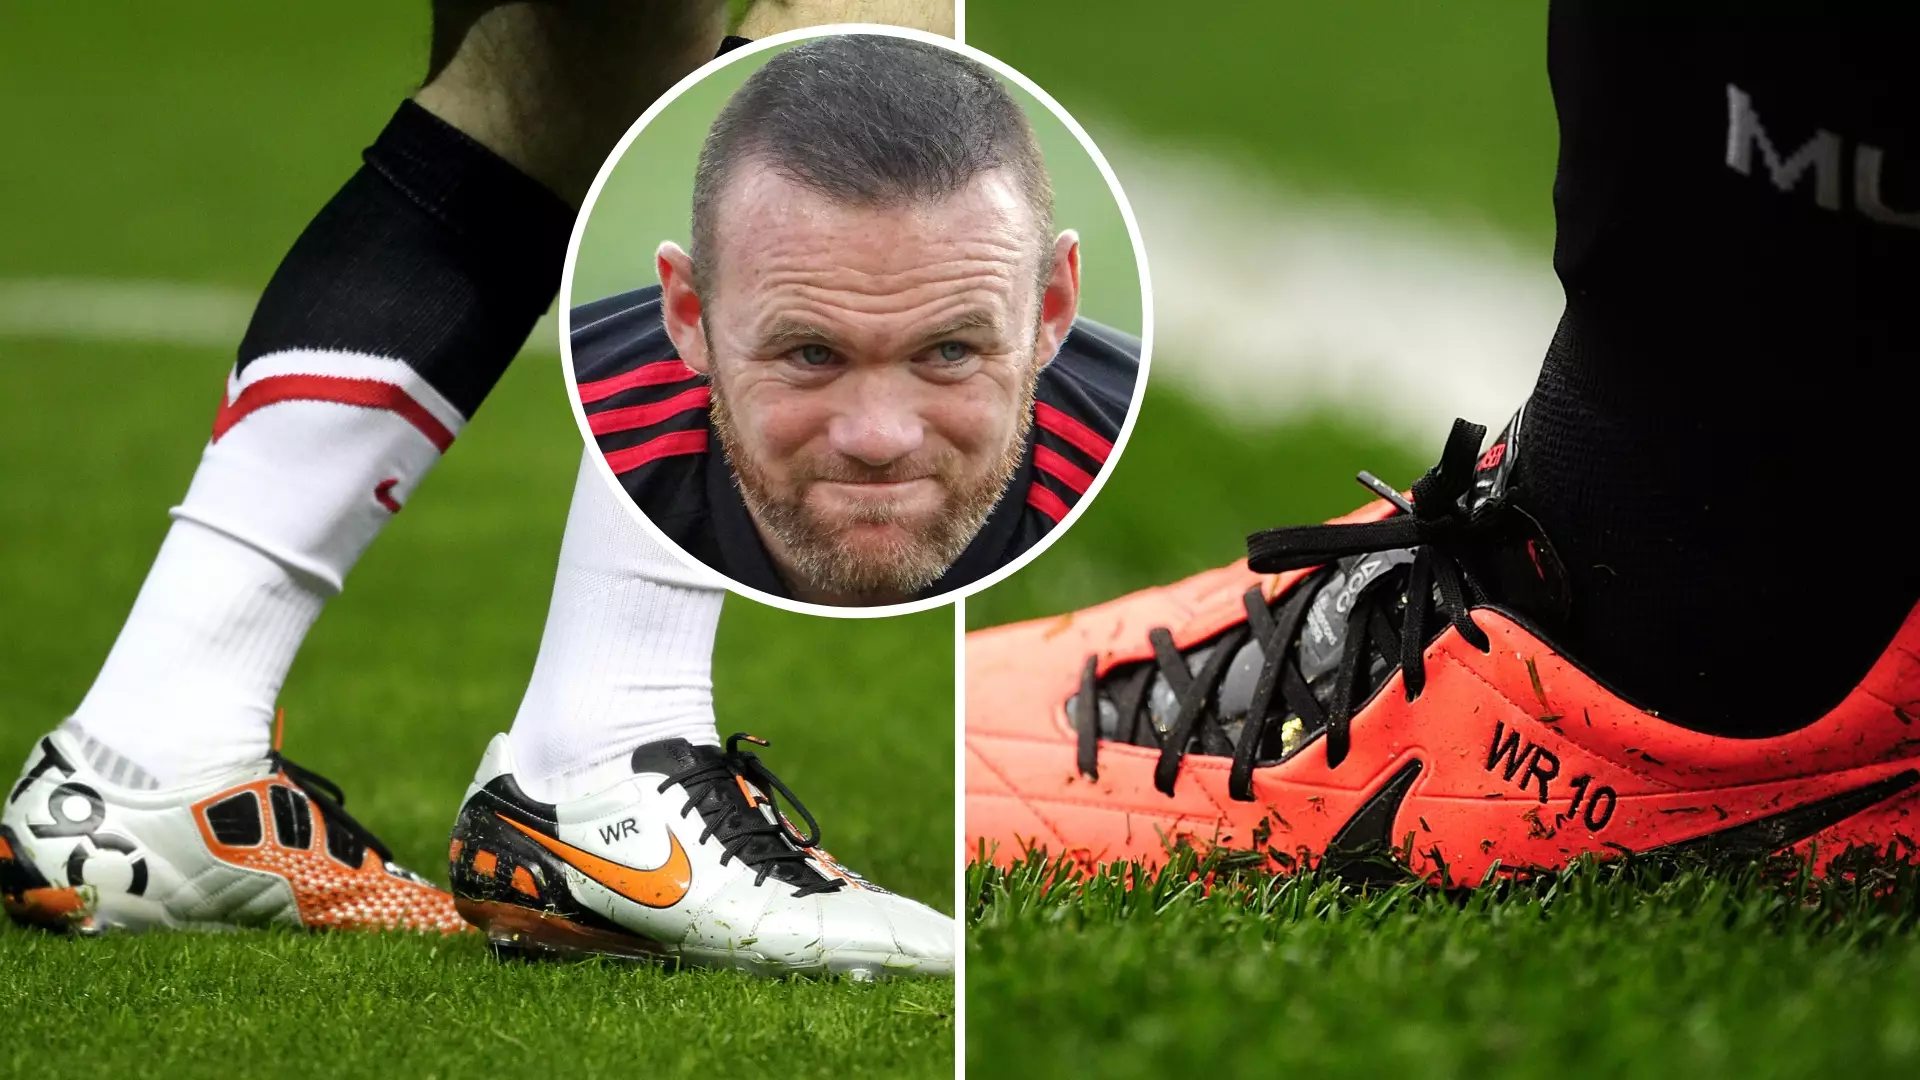 Wayne Rooney always picked a solid choice when it came to football boots.